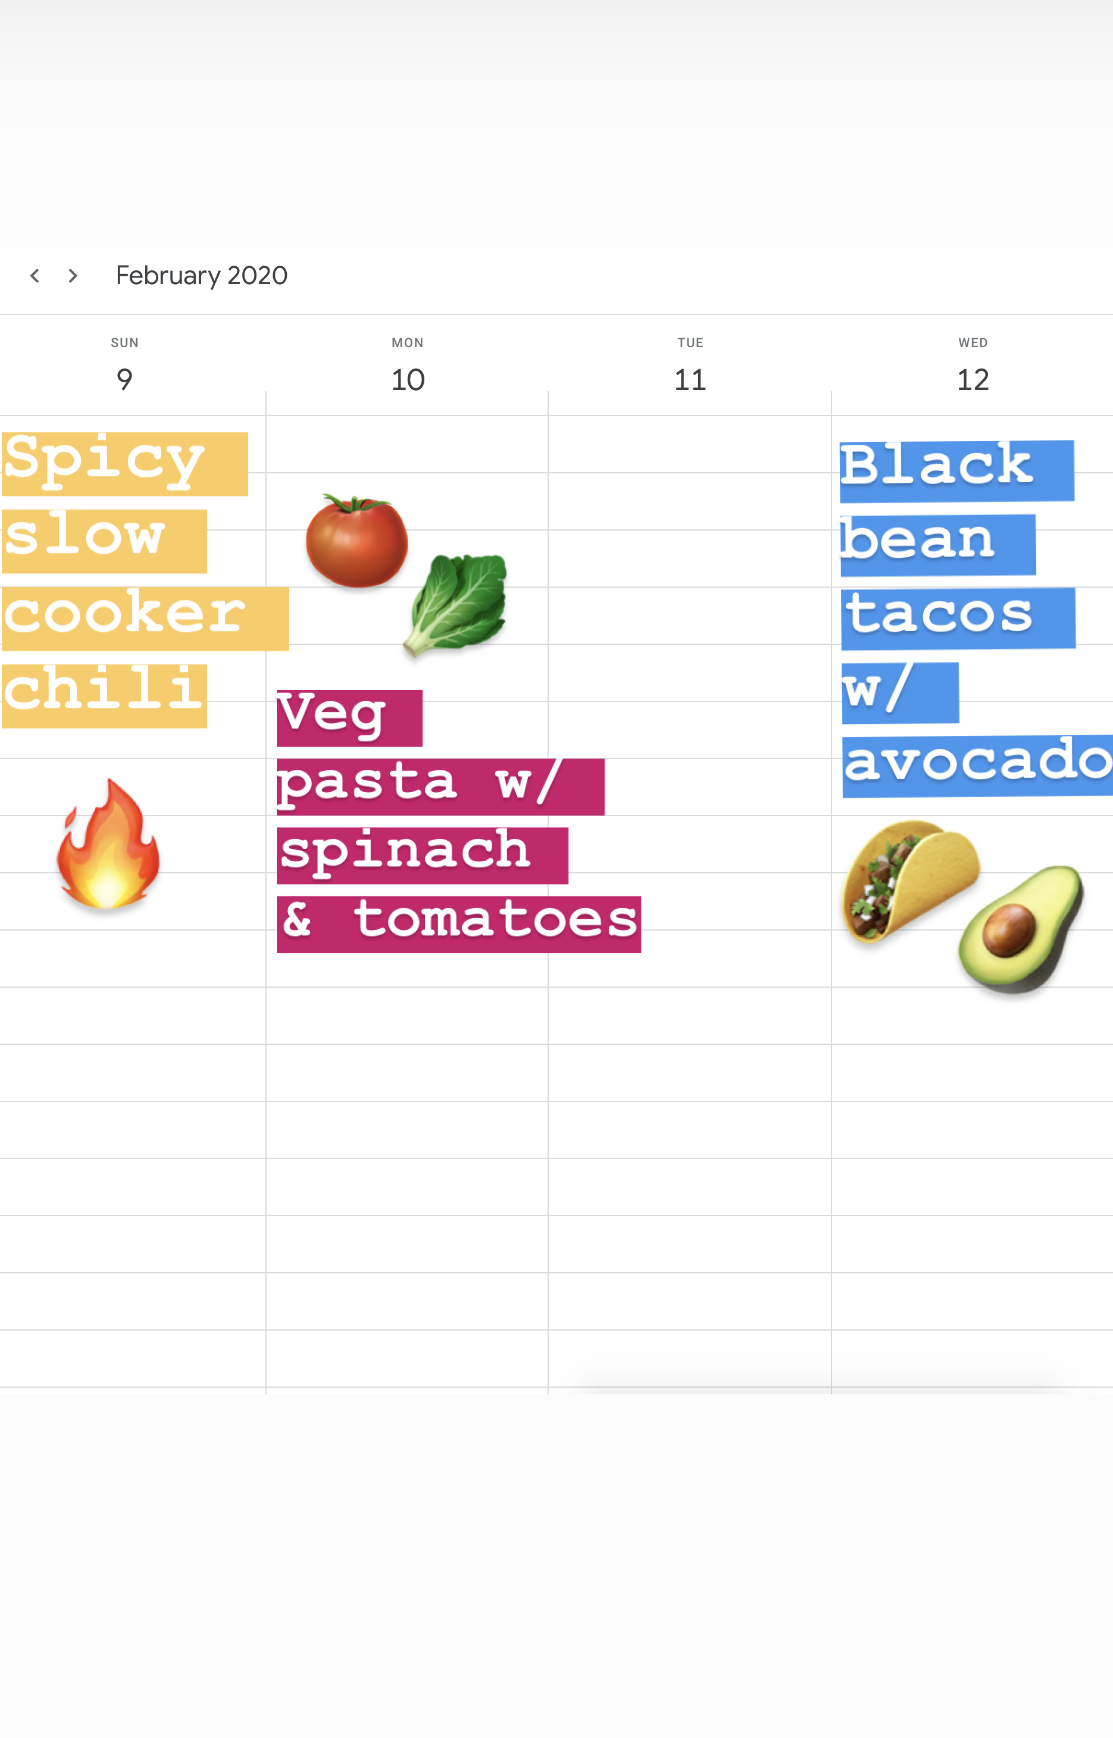 A calendar with recipes for each day